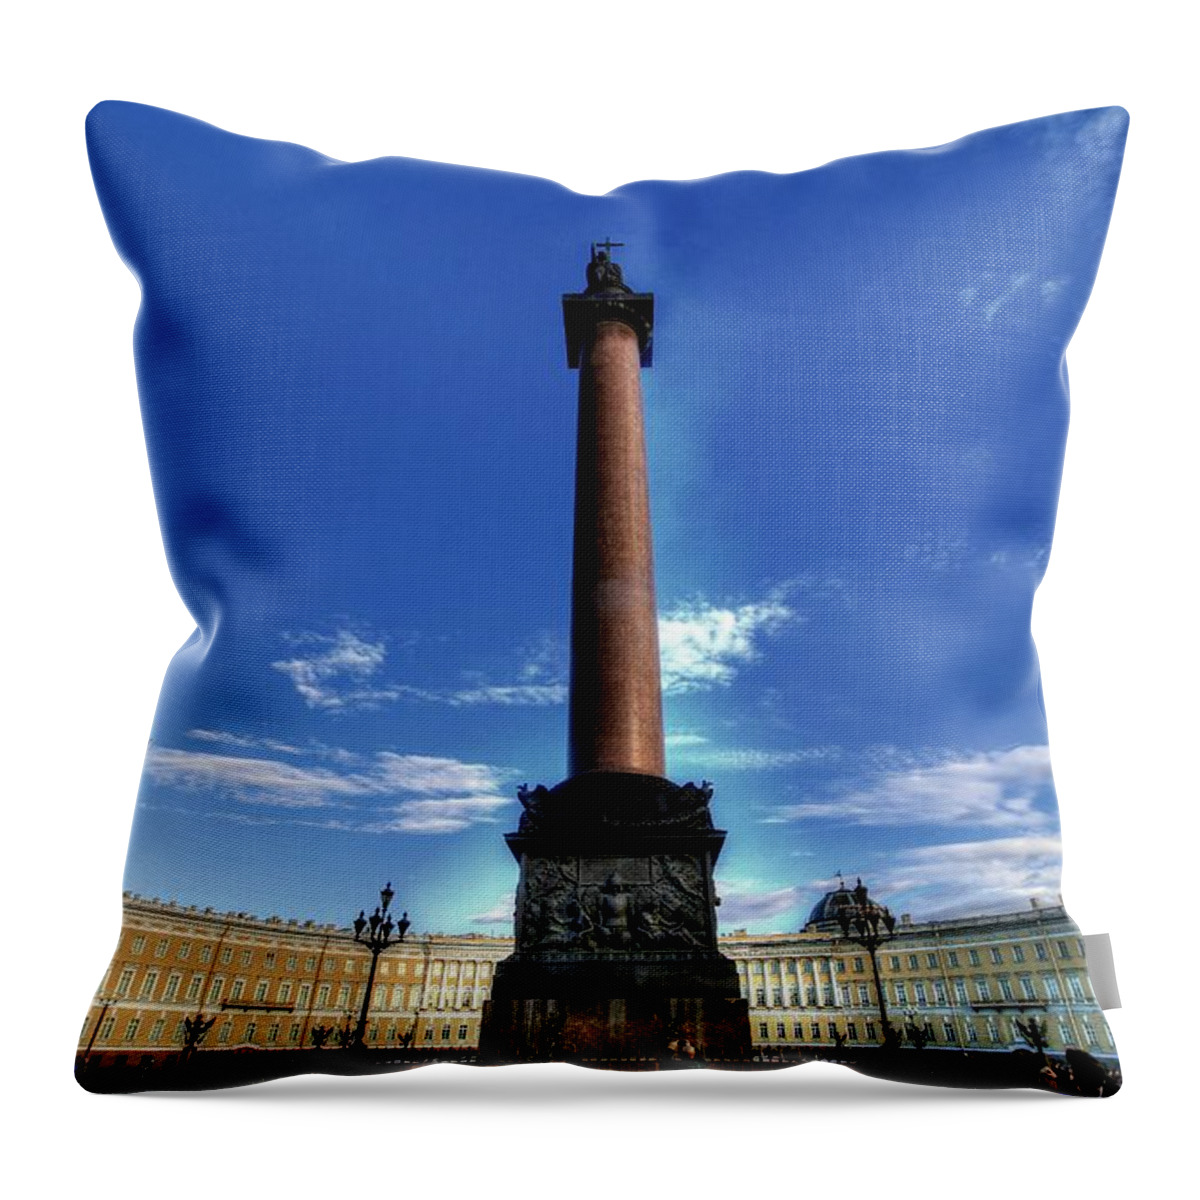 St. Petersburg Russia Throw Pillow featuring the photograph St. Petersburg Russia #5 by Paul James Bannerman